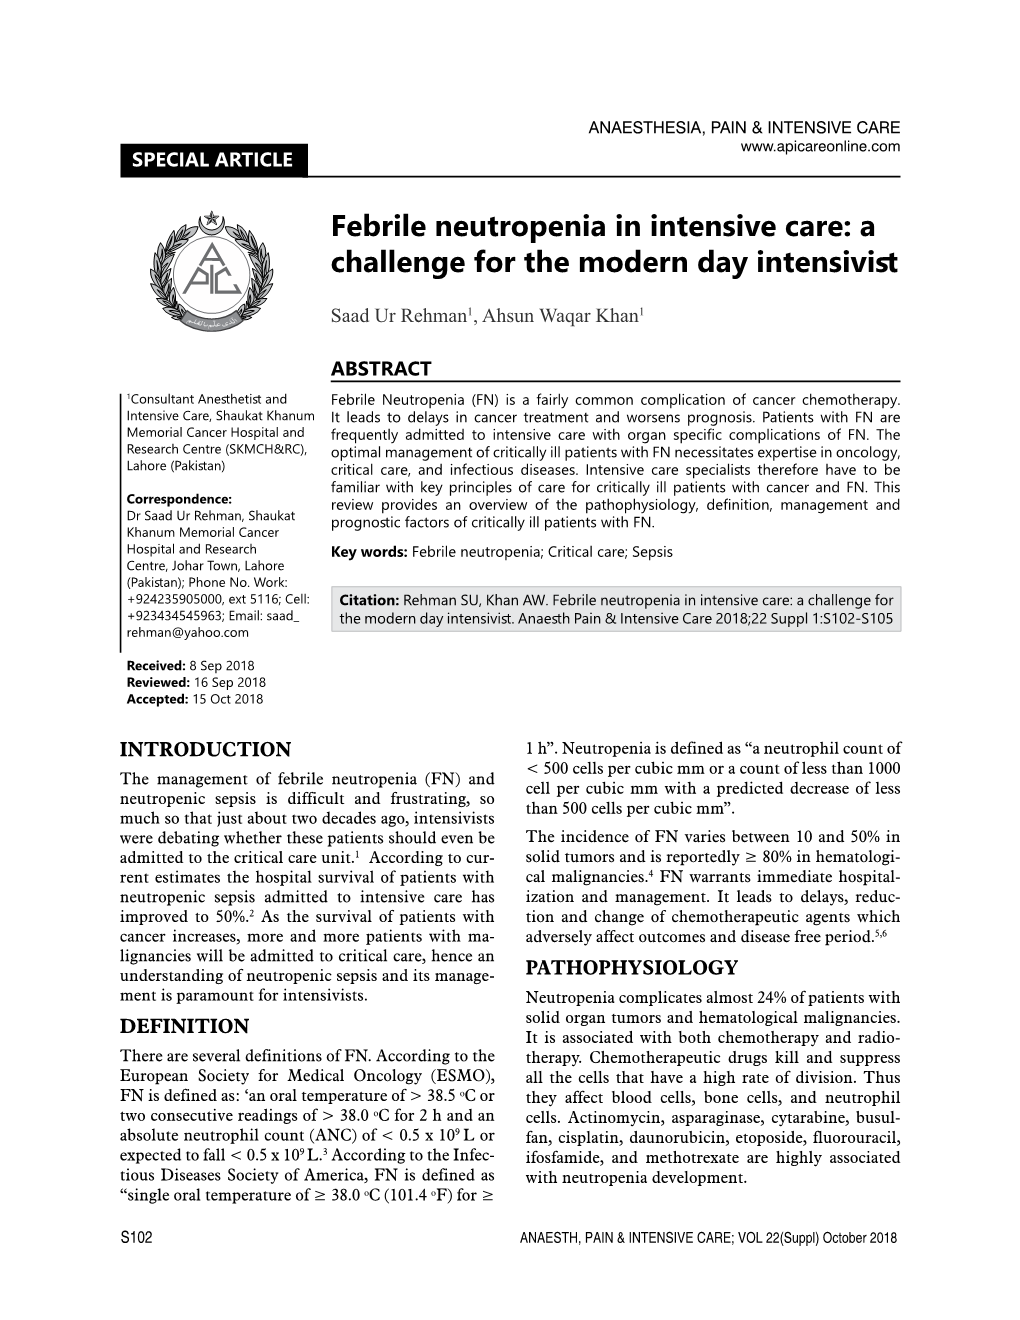 Febrile Neutropenia in Intensive Care: a Challenge for the Modern Day Intensivist